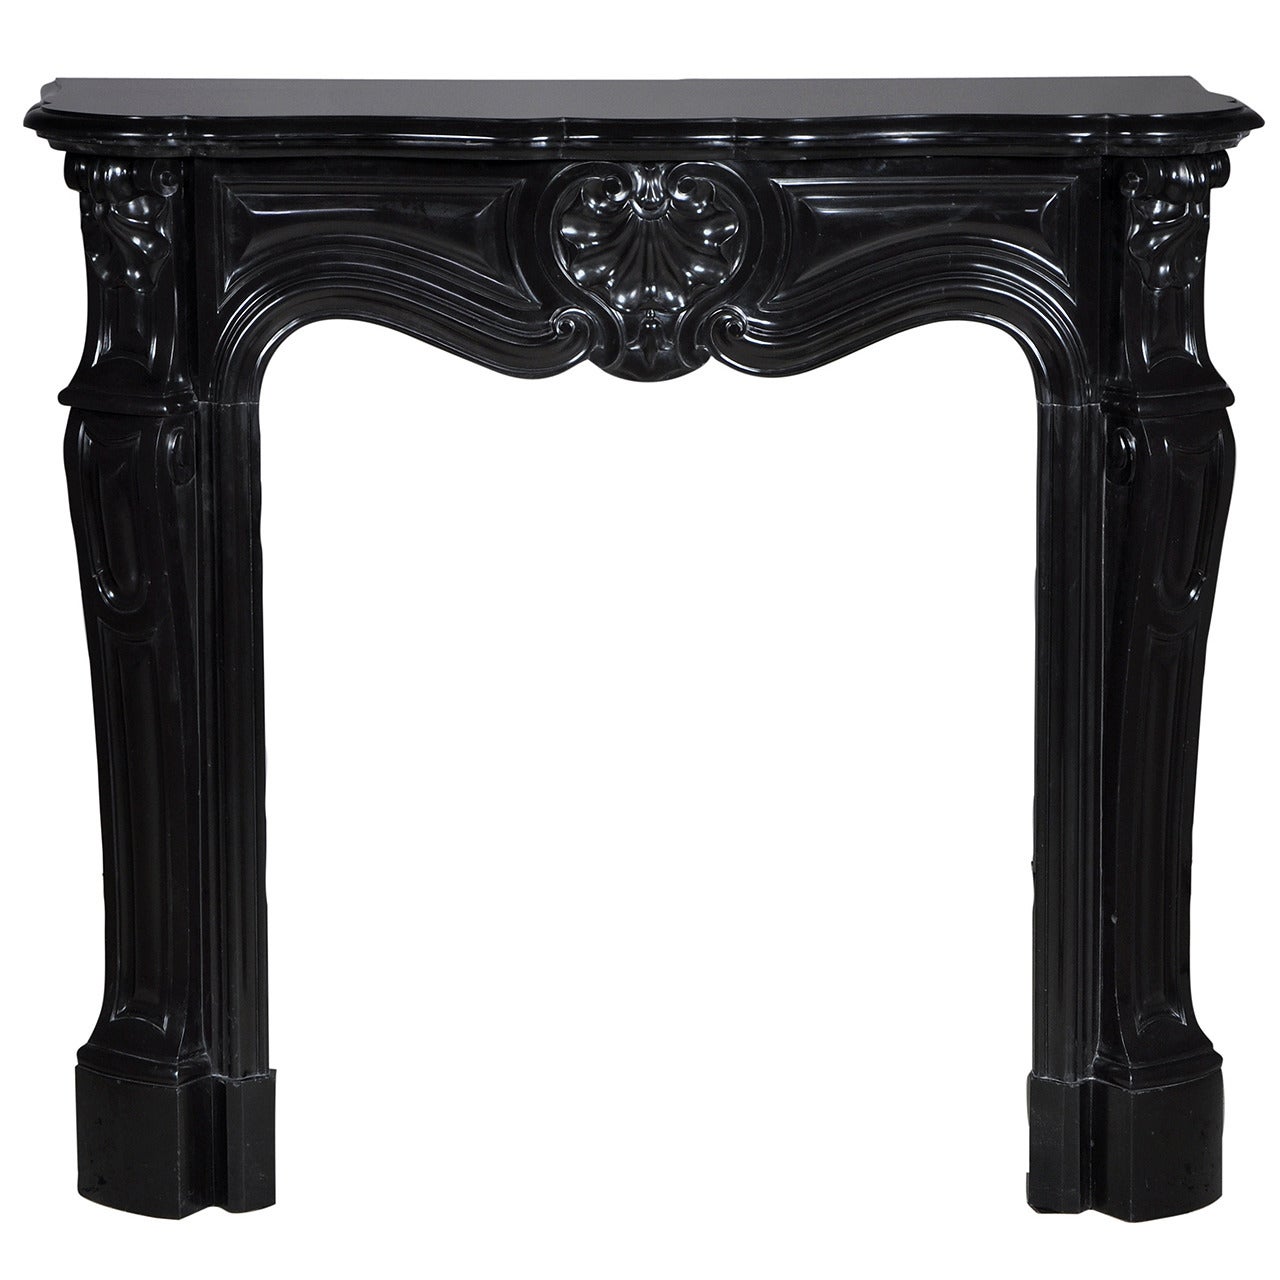 Small Antique Louis XV Style Fireplace Sculpted in Black Belgian Marble